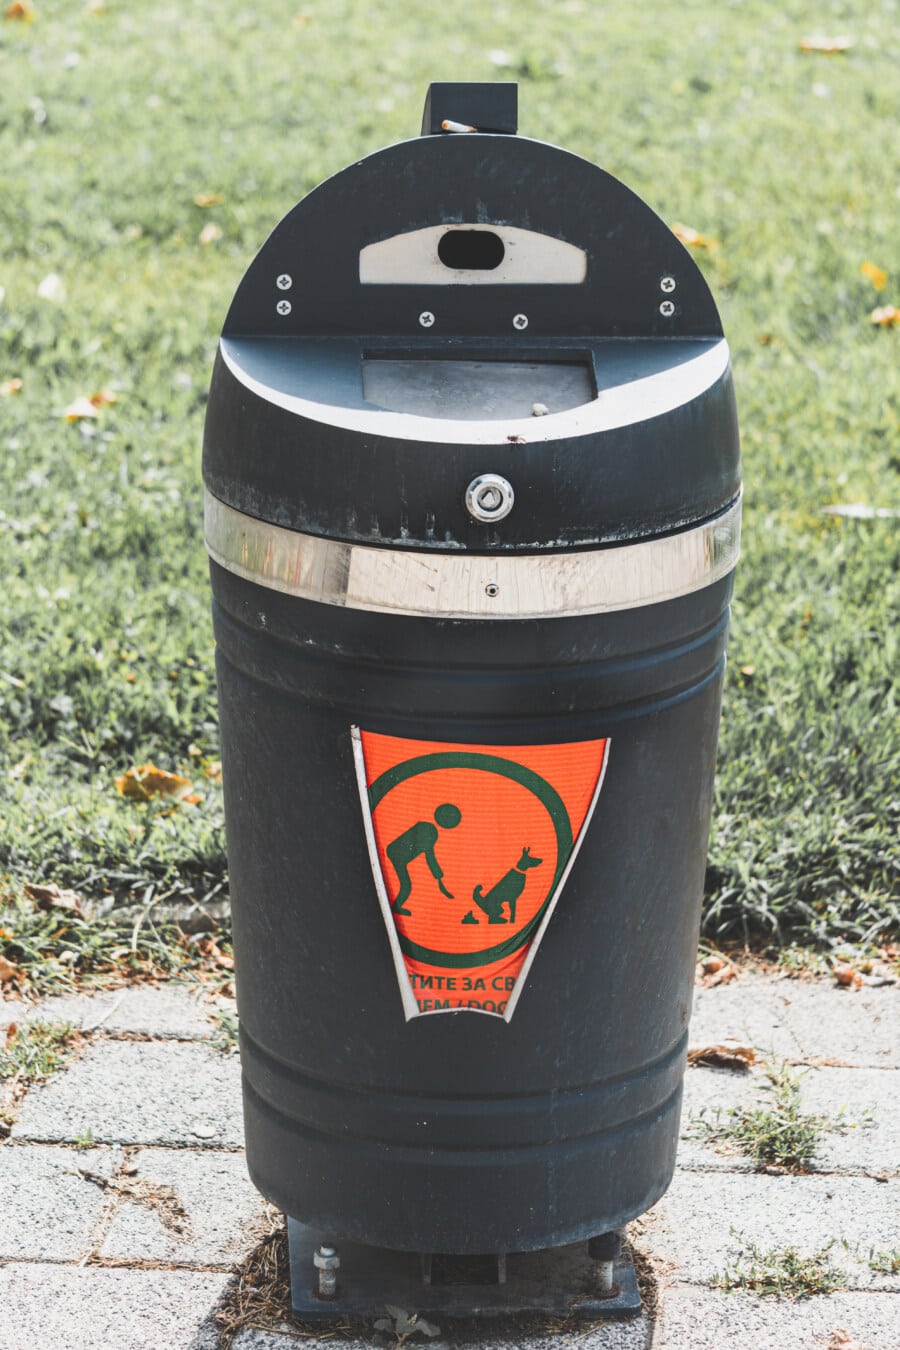 trash can, garbage collection, garbage, container, trash, recycling, outdoors, waste, nature, black